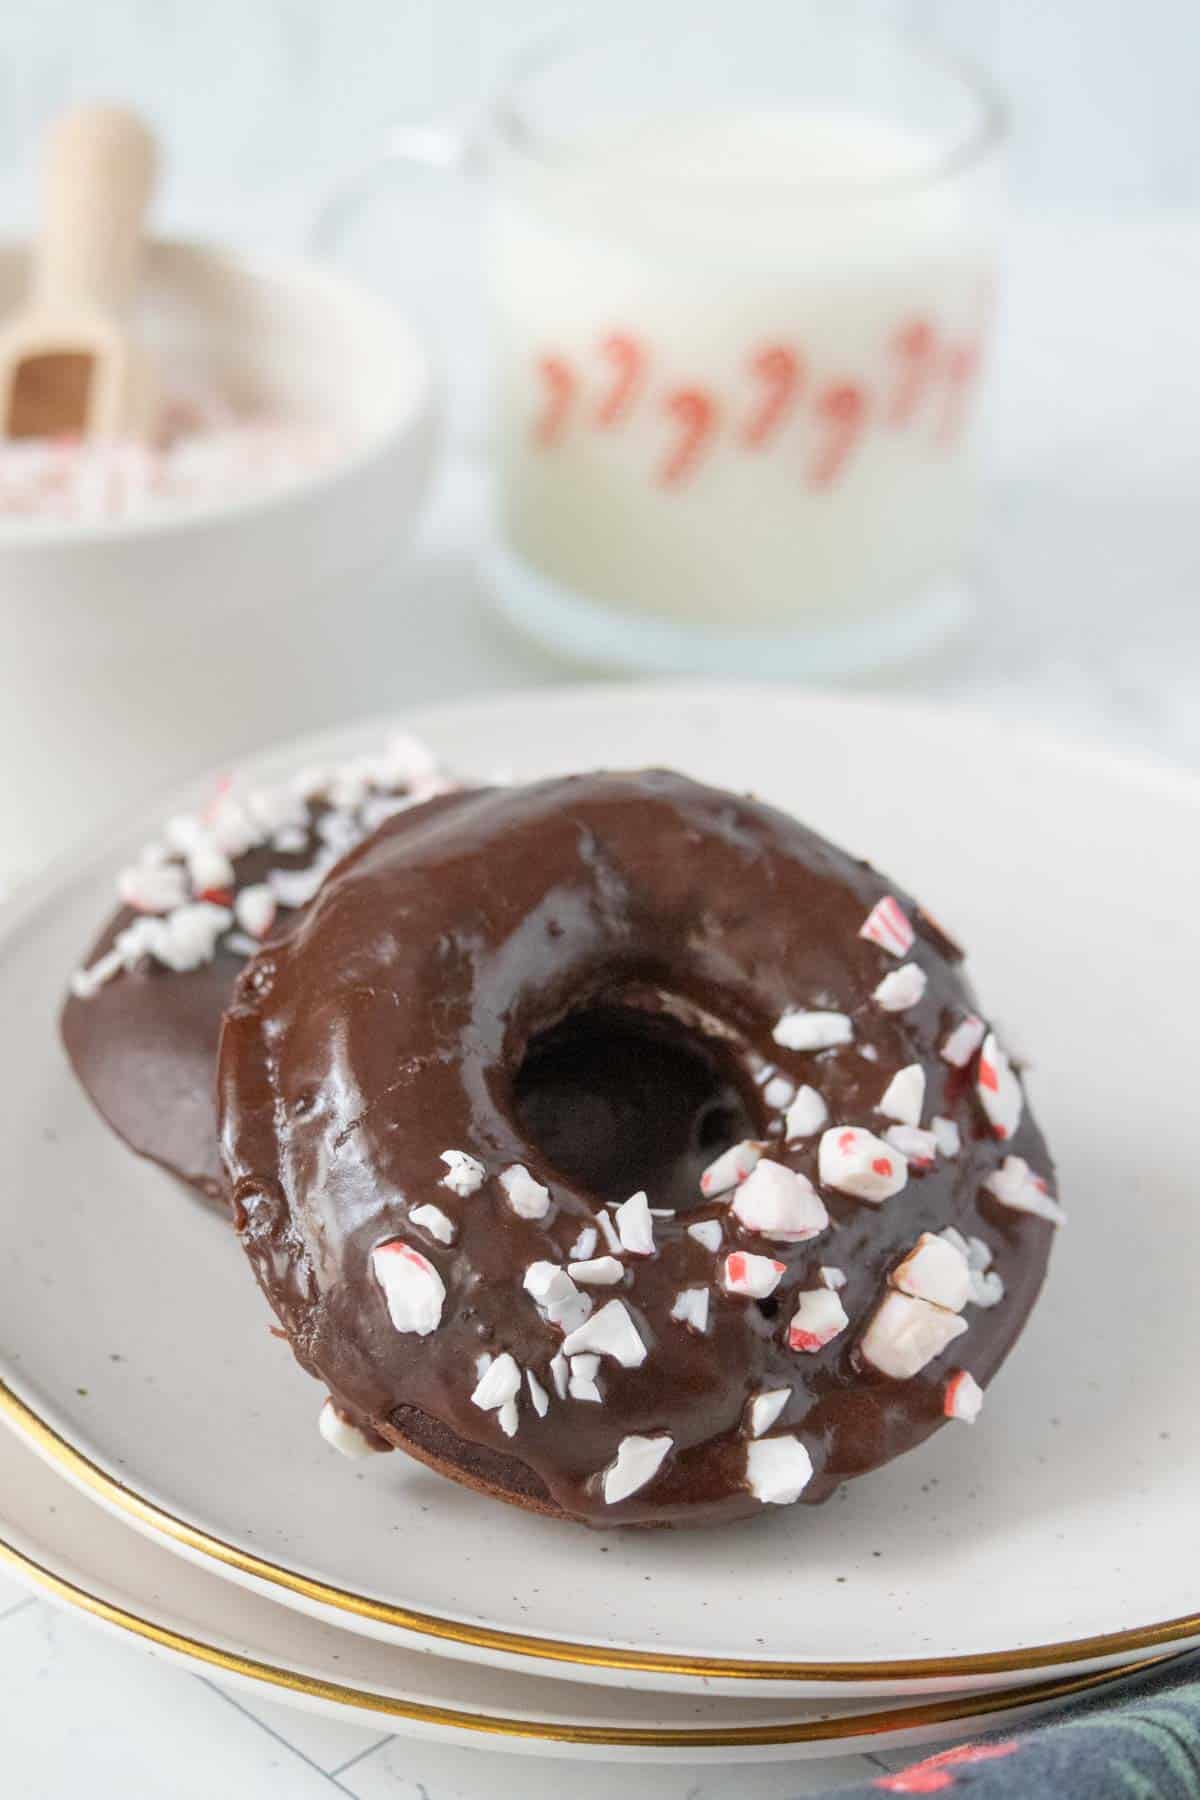 Two chocolate donuts with peppermint sprinkles on a plate.